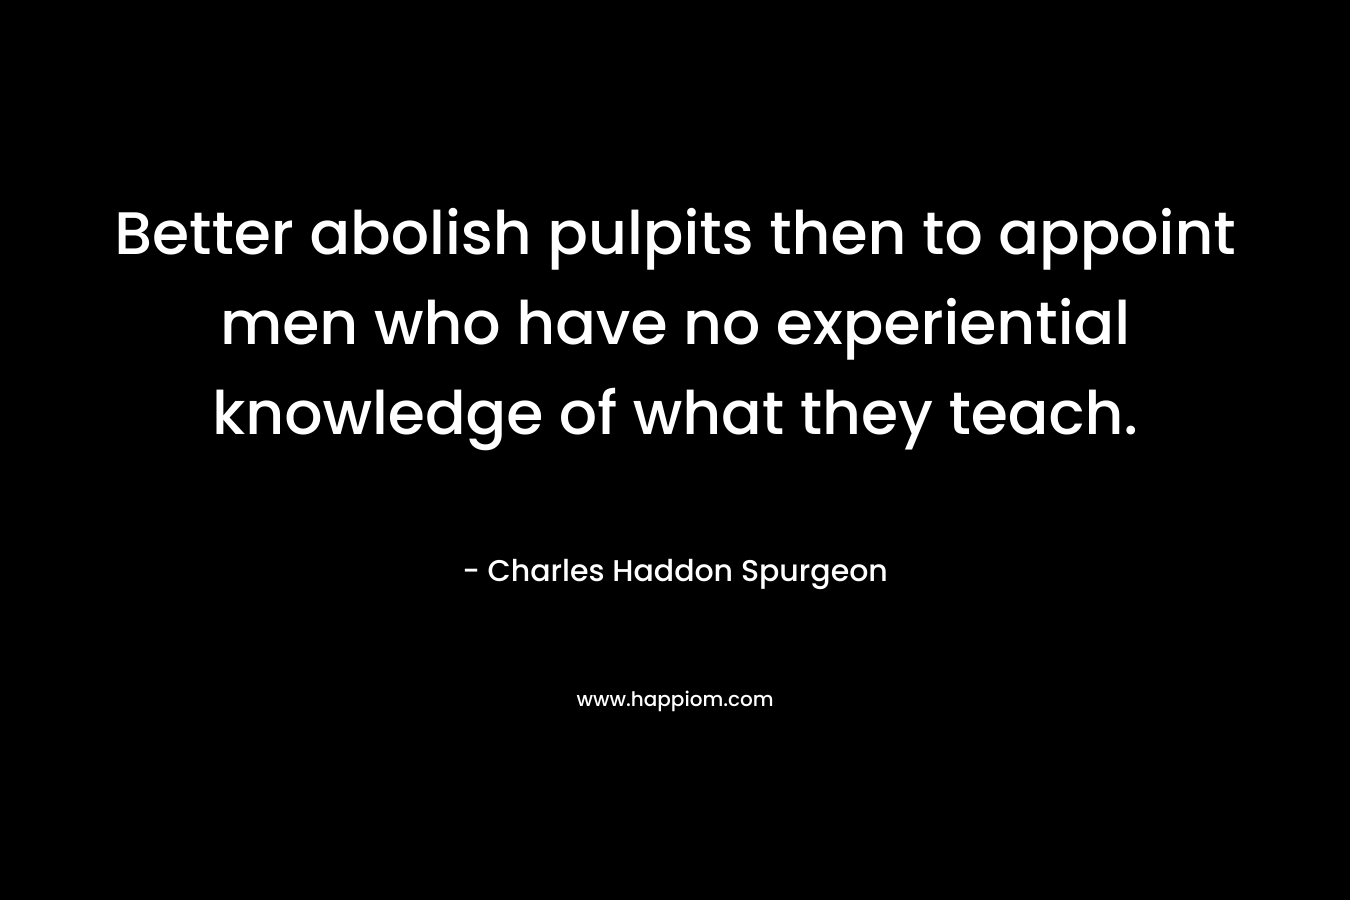 Better abolish pulpits then to appoint men who have no experiential knowledge of what they teach. – Charles Haddon Spurgeon